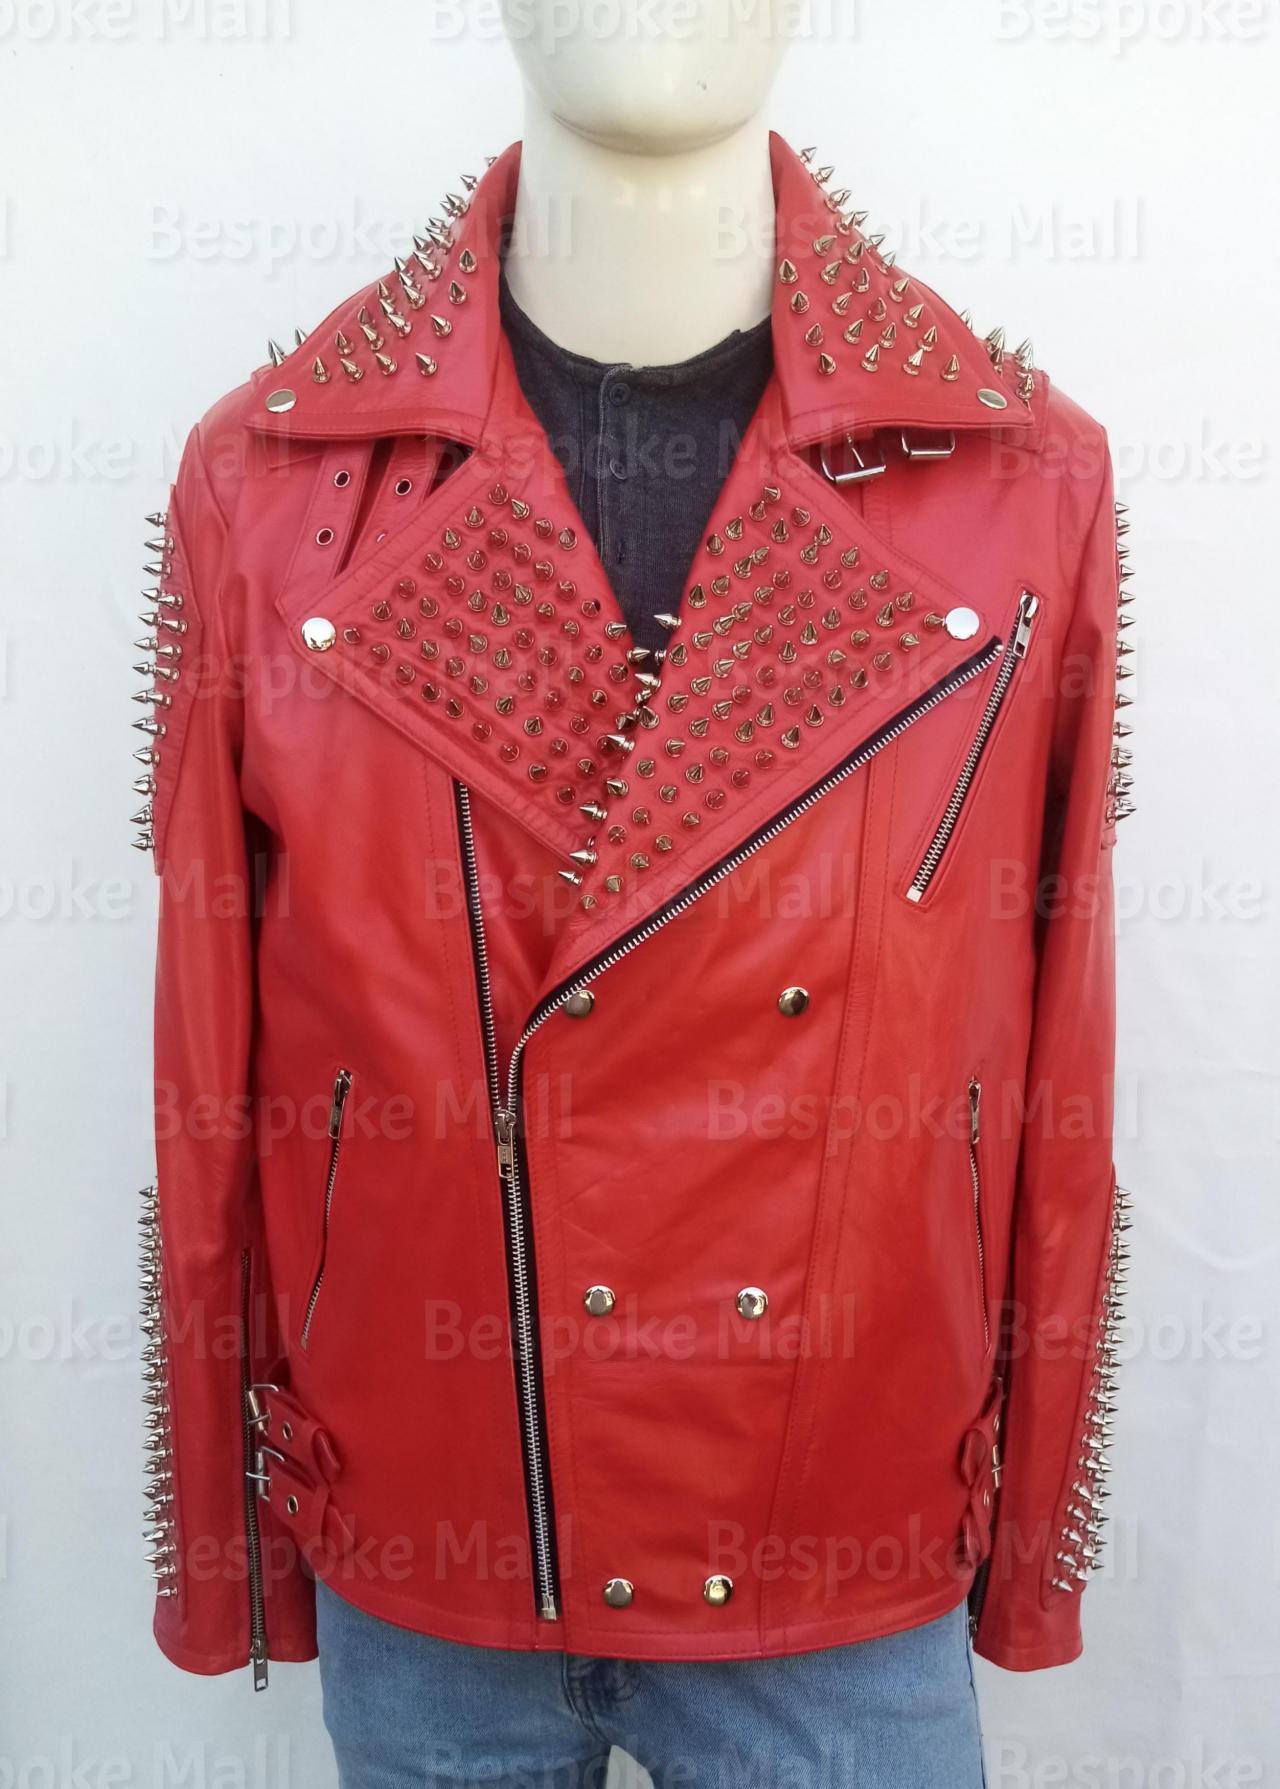 New Handmade Mens Red Silver Spiked Studded Fashion Cowhide Biker Leather Jacket Button Up-37